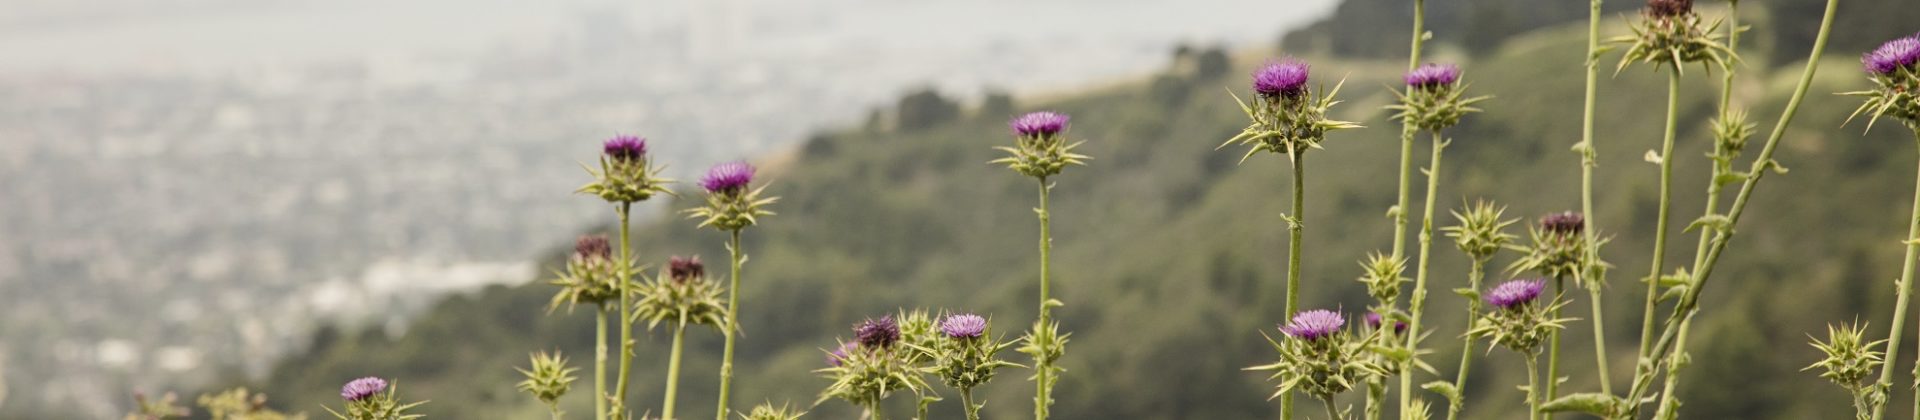 view of flowers on hill in San Francisco